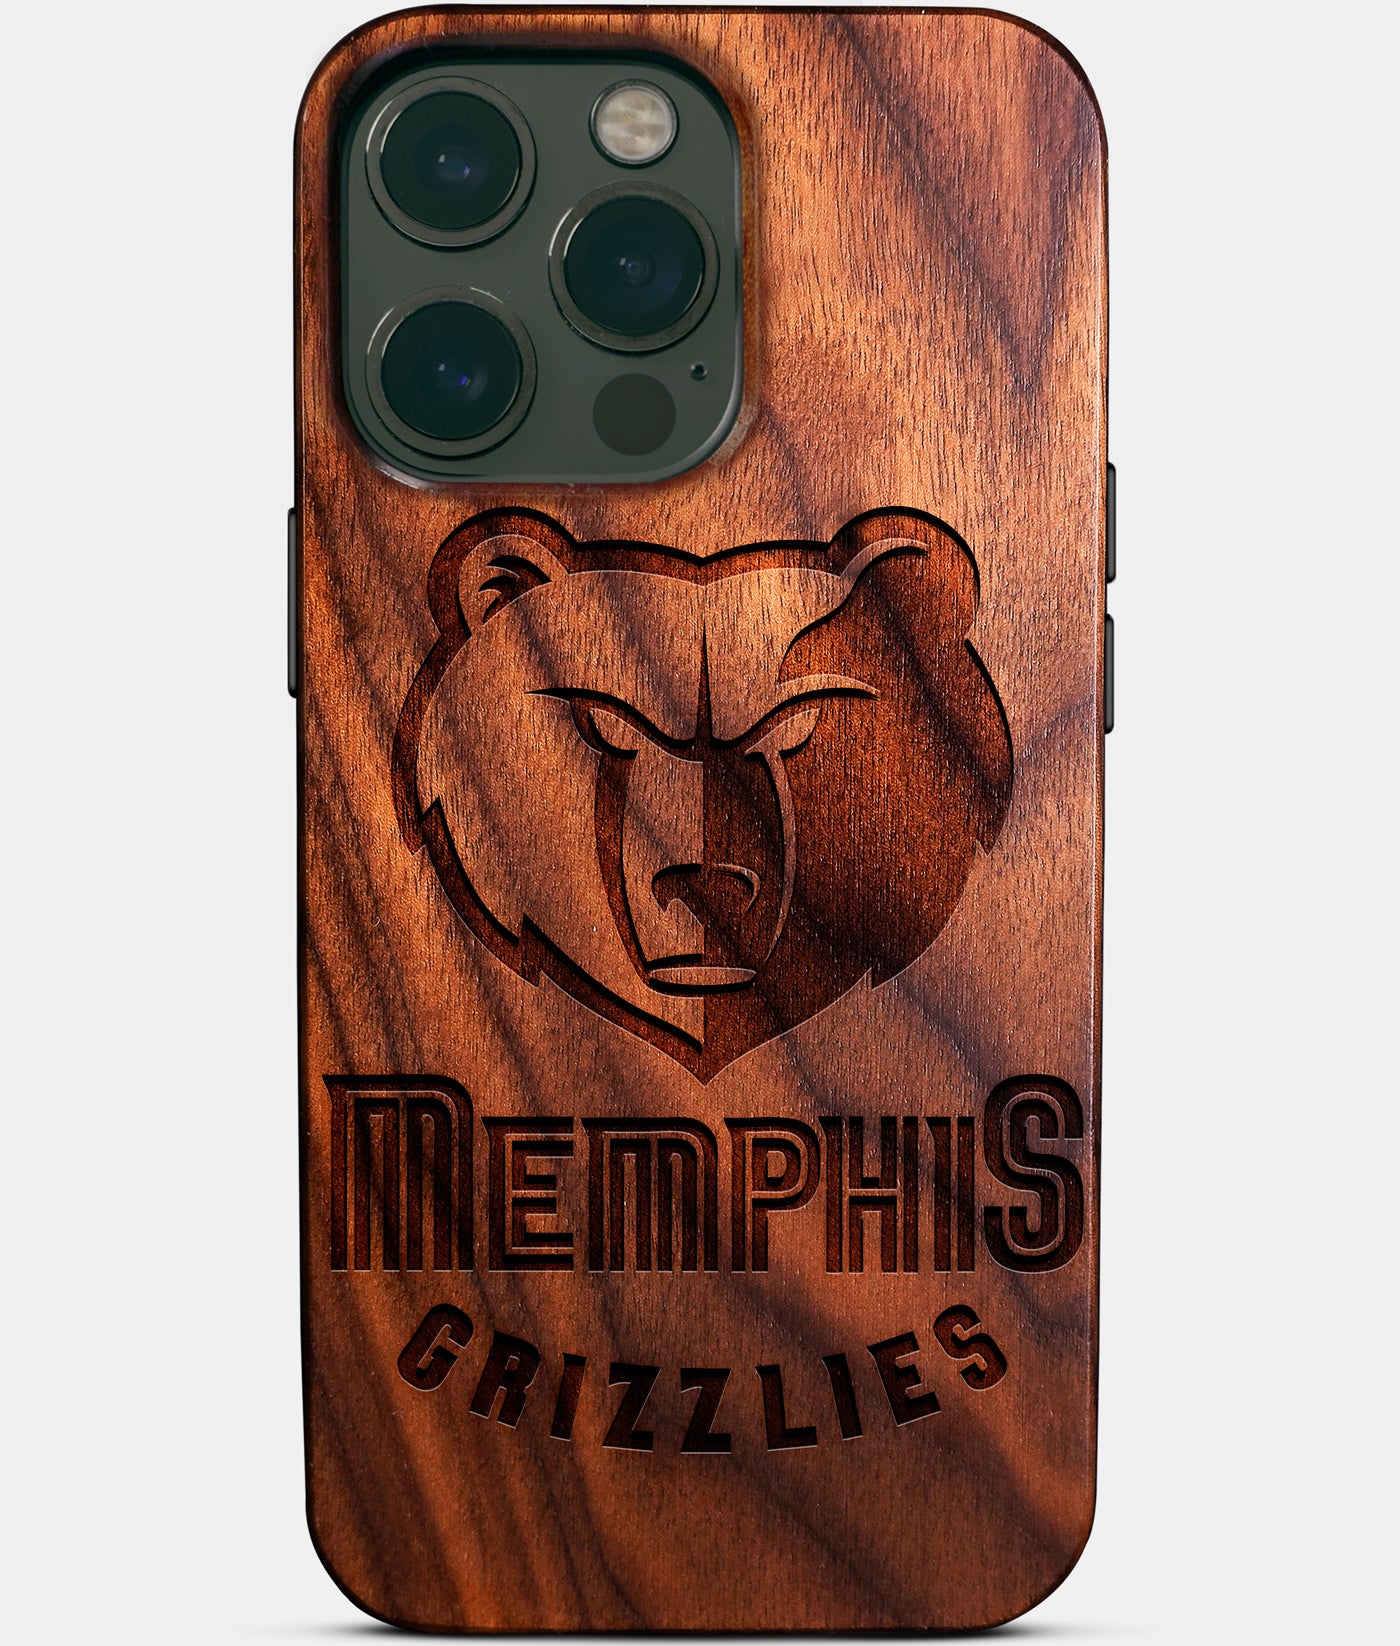 Custom Memphis Grizzlies iPhone 14/14 Pro/14 Pro Max/14 Plus Case - Carved Wood Grizzlies Cover - Eco-friendly Memphis Grizzlies iPhone 14 Case - Custom Memphis Grizzlies Gift For Him - Monogrammed Personalized iPhone 14 Cover By Engraved In Nature